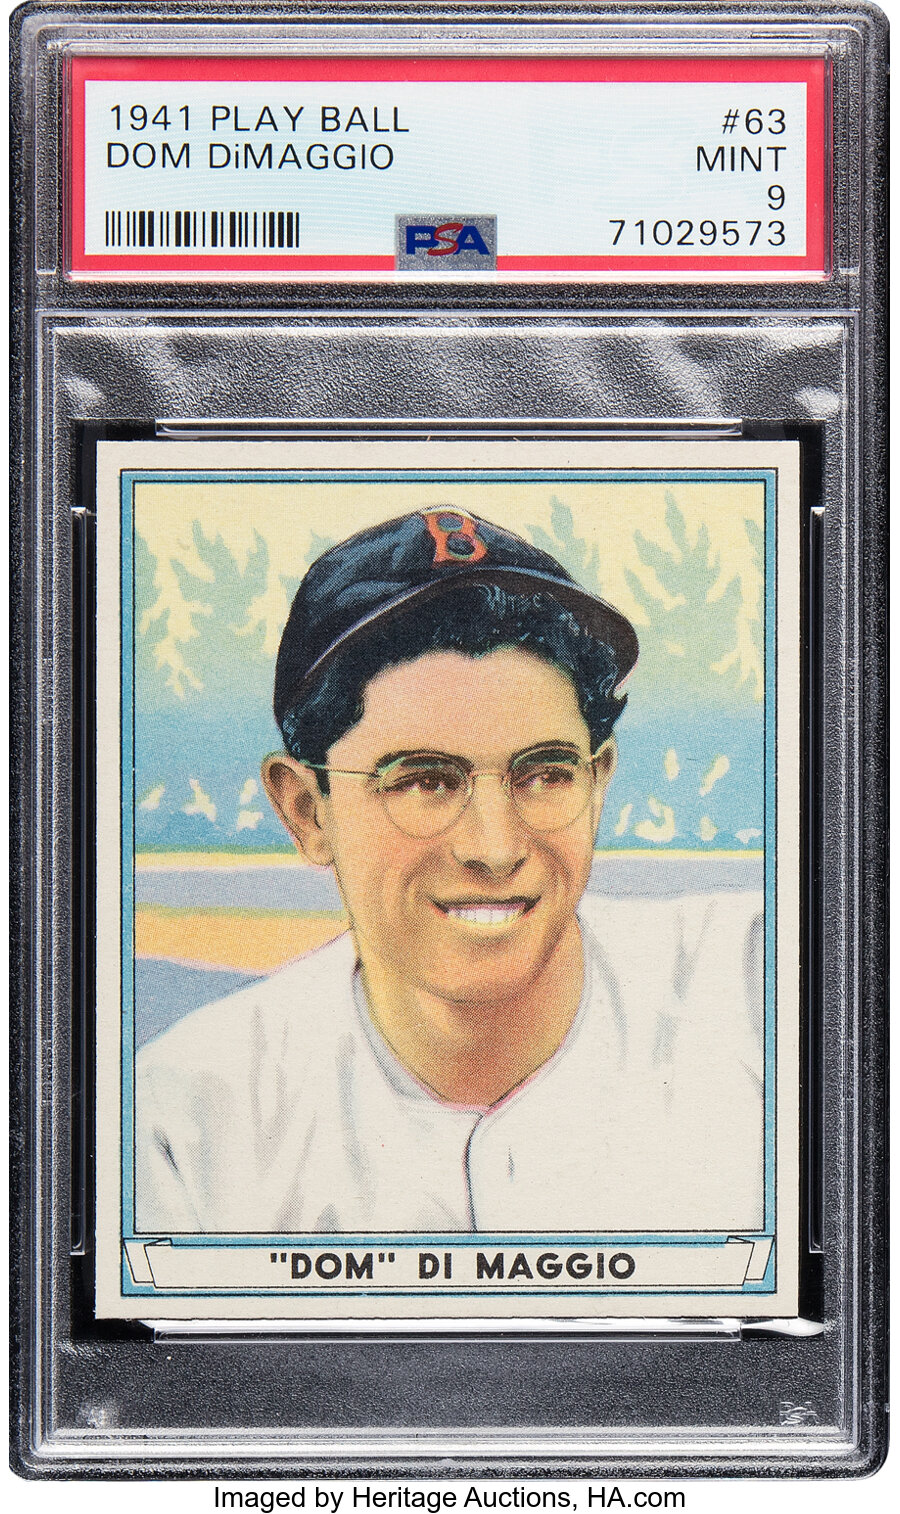 1941 Play Ball Dom DiMaggio Rookie #63 PSA Mint 9 - None Higher